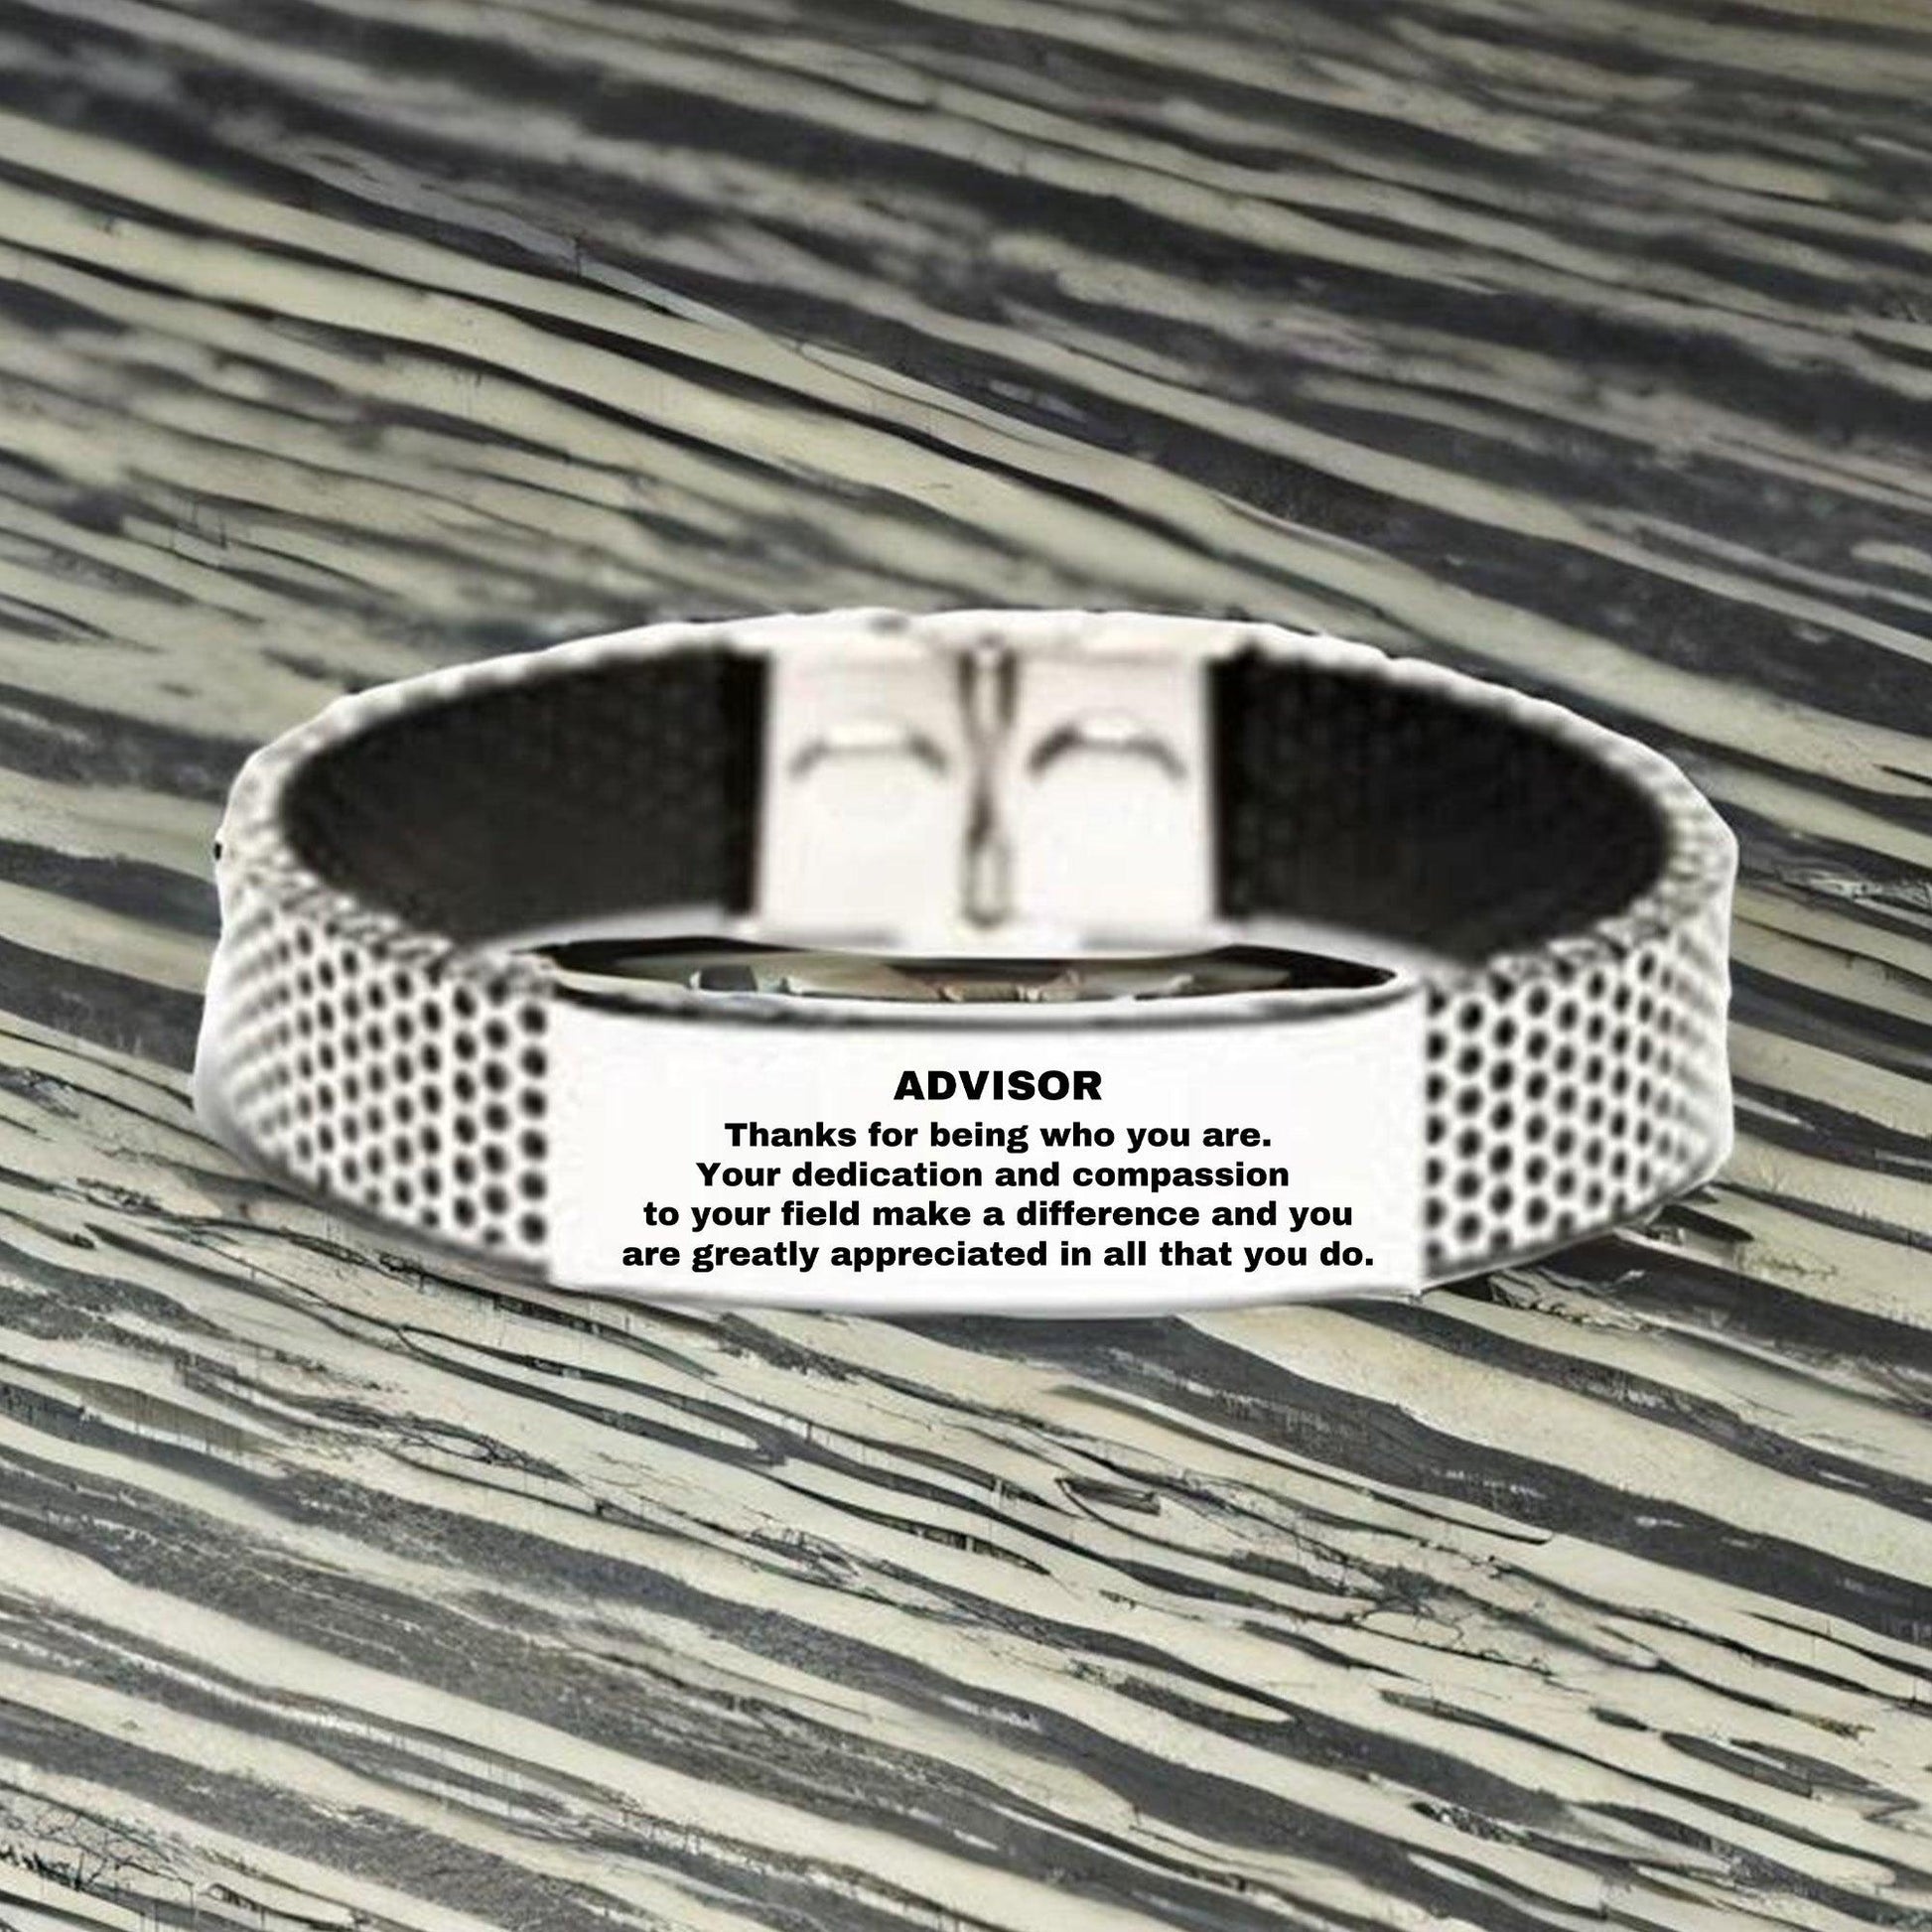 Advisor Silver Shark Mesh Stainless Steel Engraved Bracelet - Thanks for being who you are - Birthday Christmas Jewelry Gifts Coworkers Colleague Boss - Mallard Moon Gift Shop